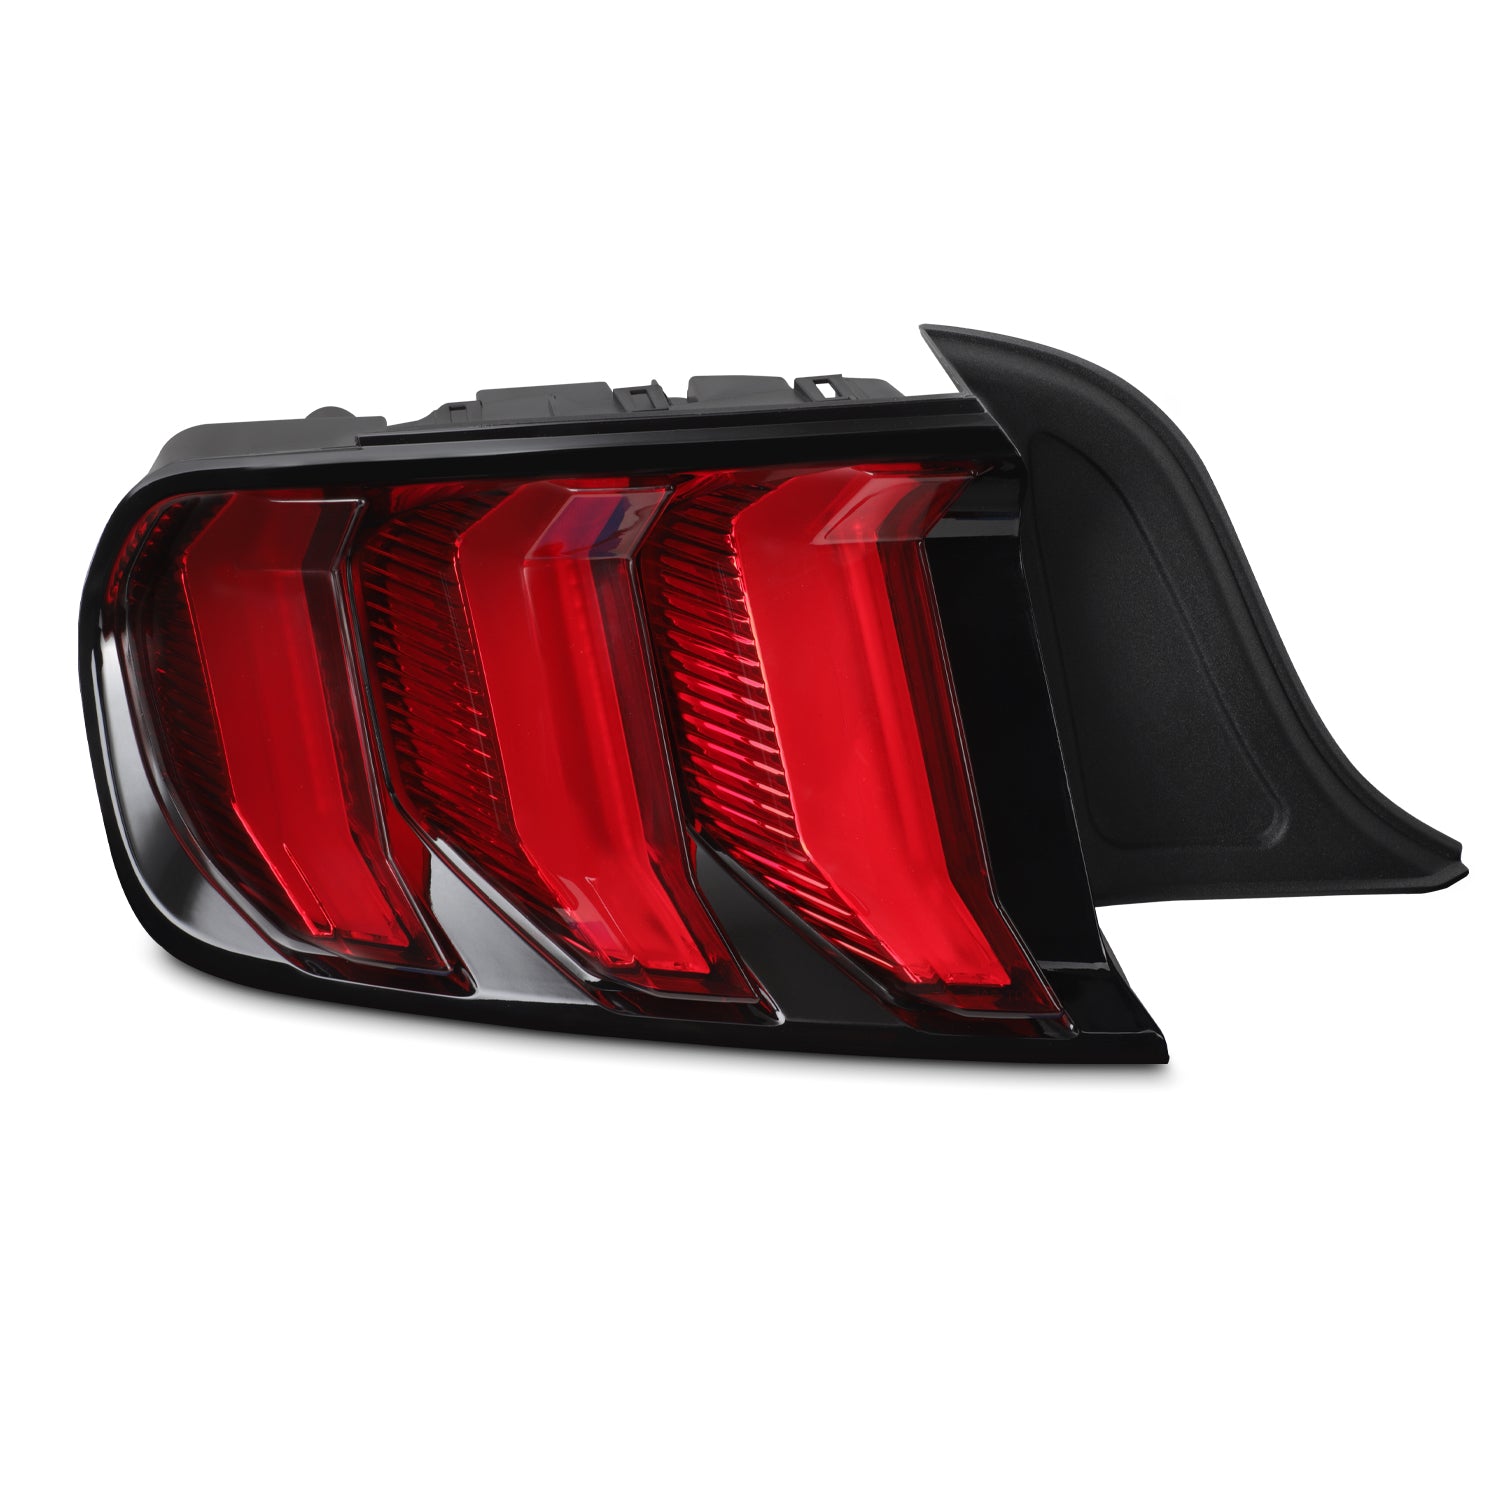 AKKON - Fits 2018-2023 Ford Mustang [Full LED] Running Sequential Turn